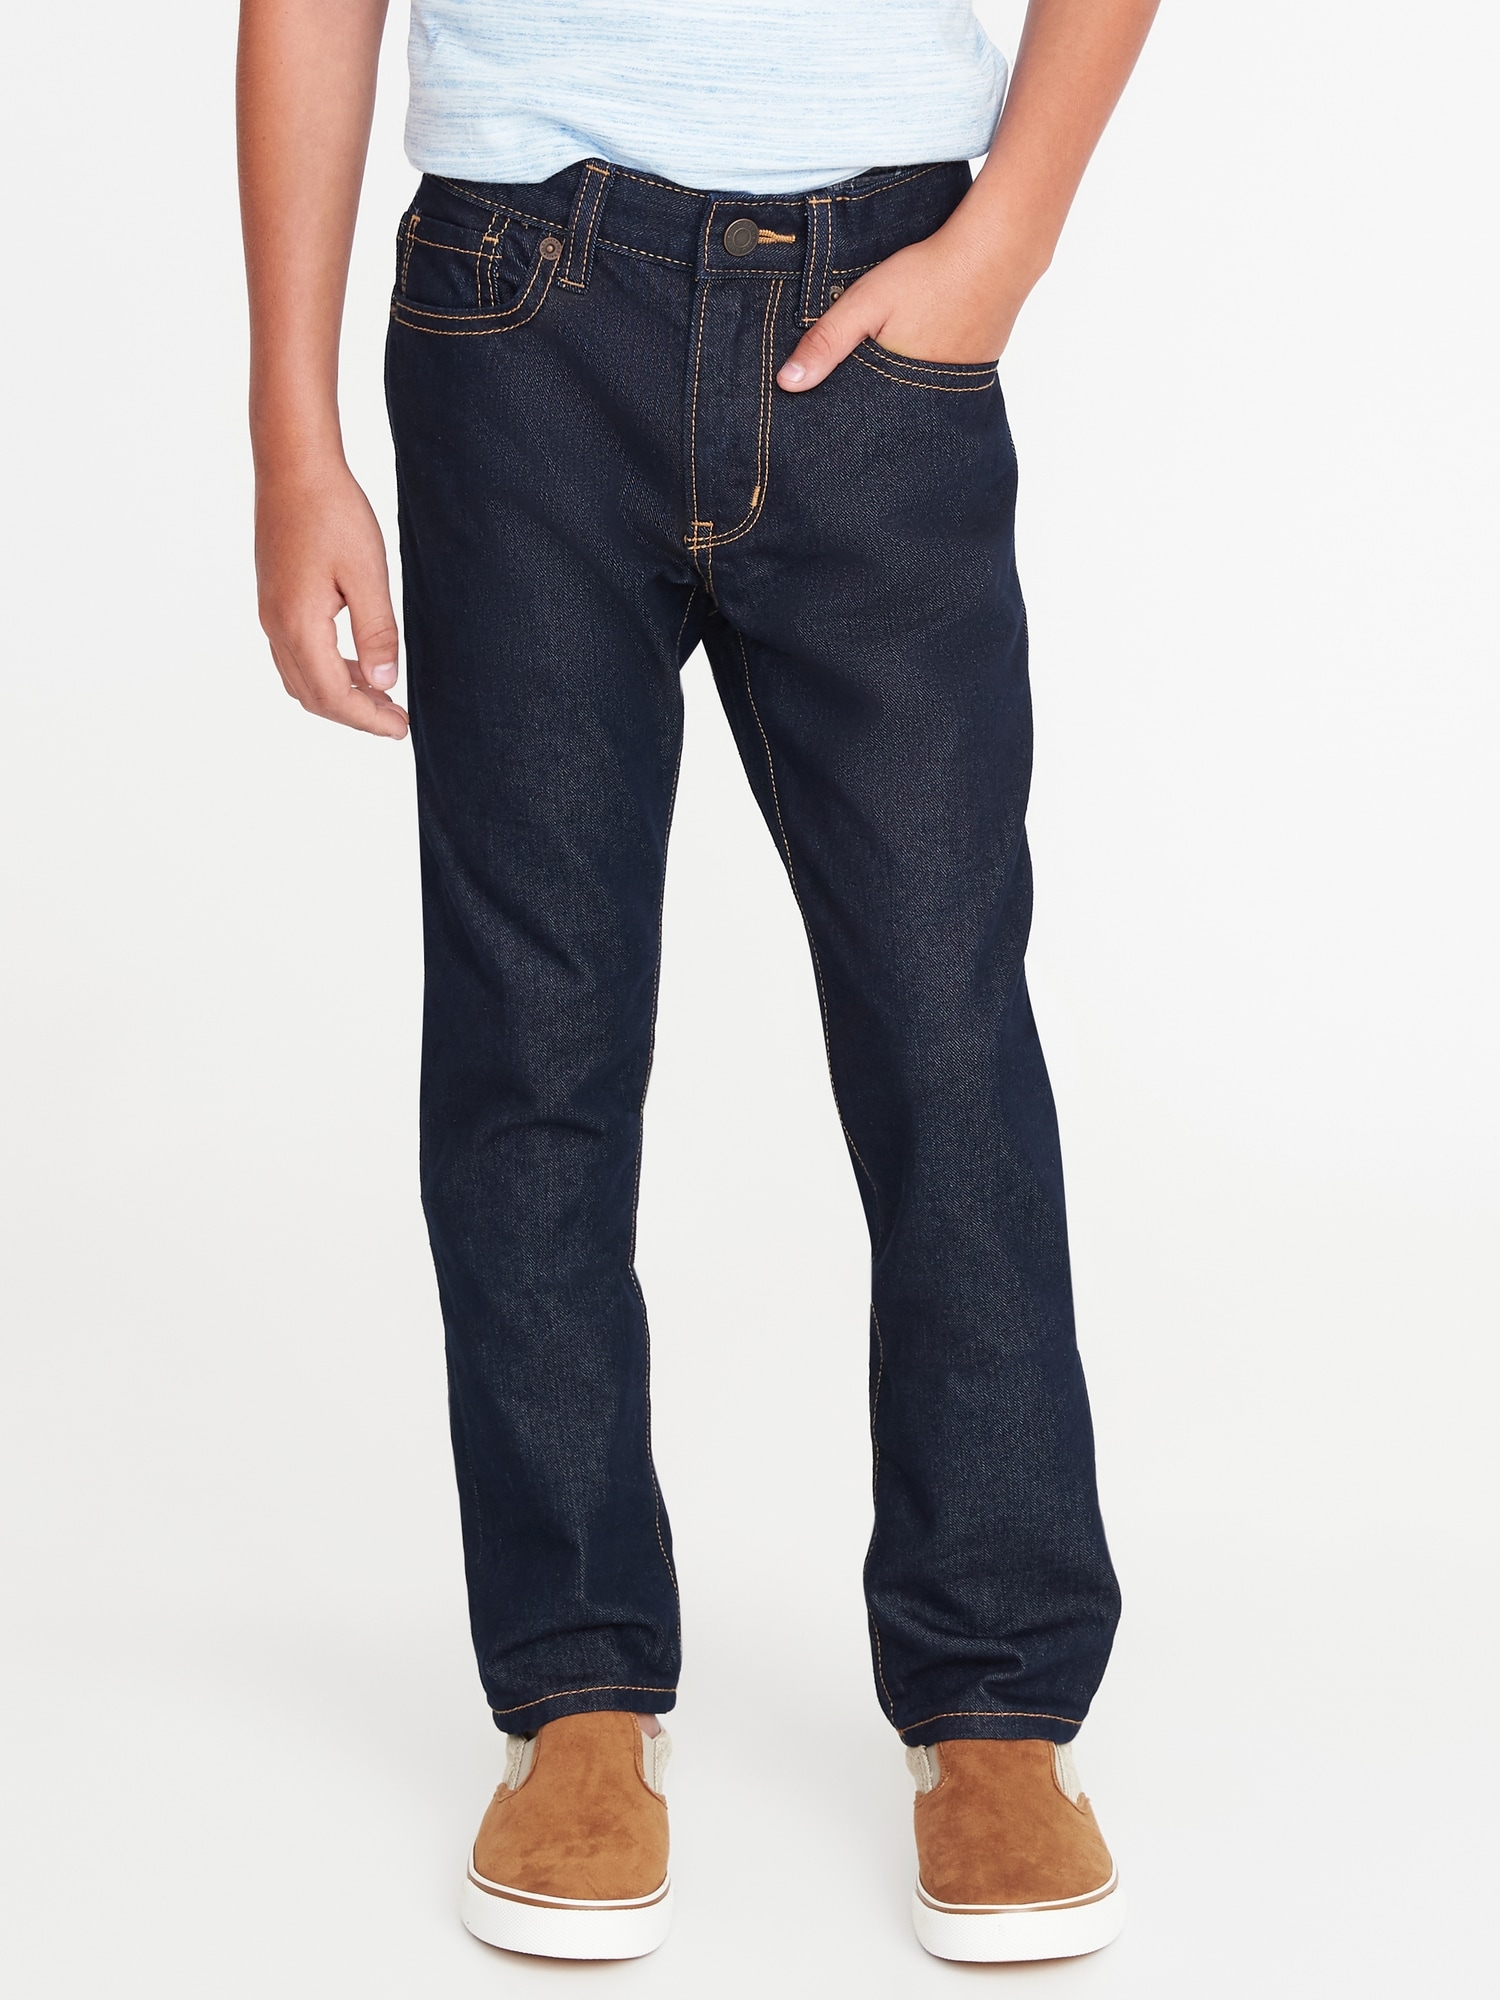 Skinny Non-Stretch Jeans For Boys On Sale At Old Navy